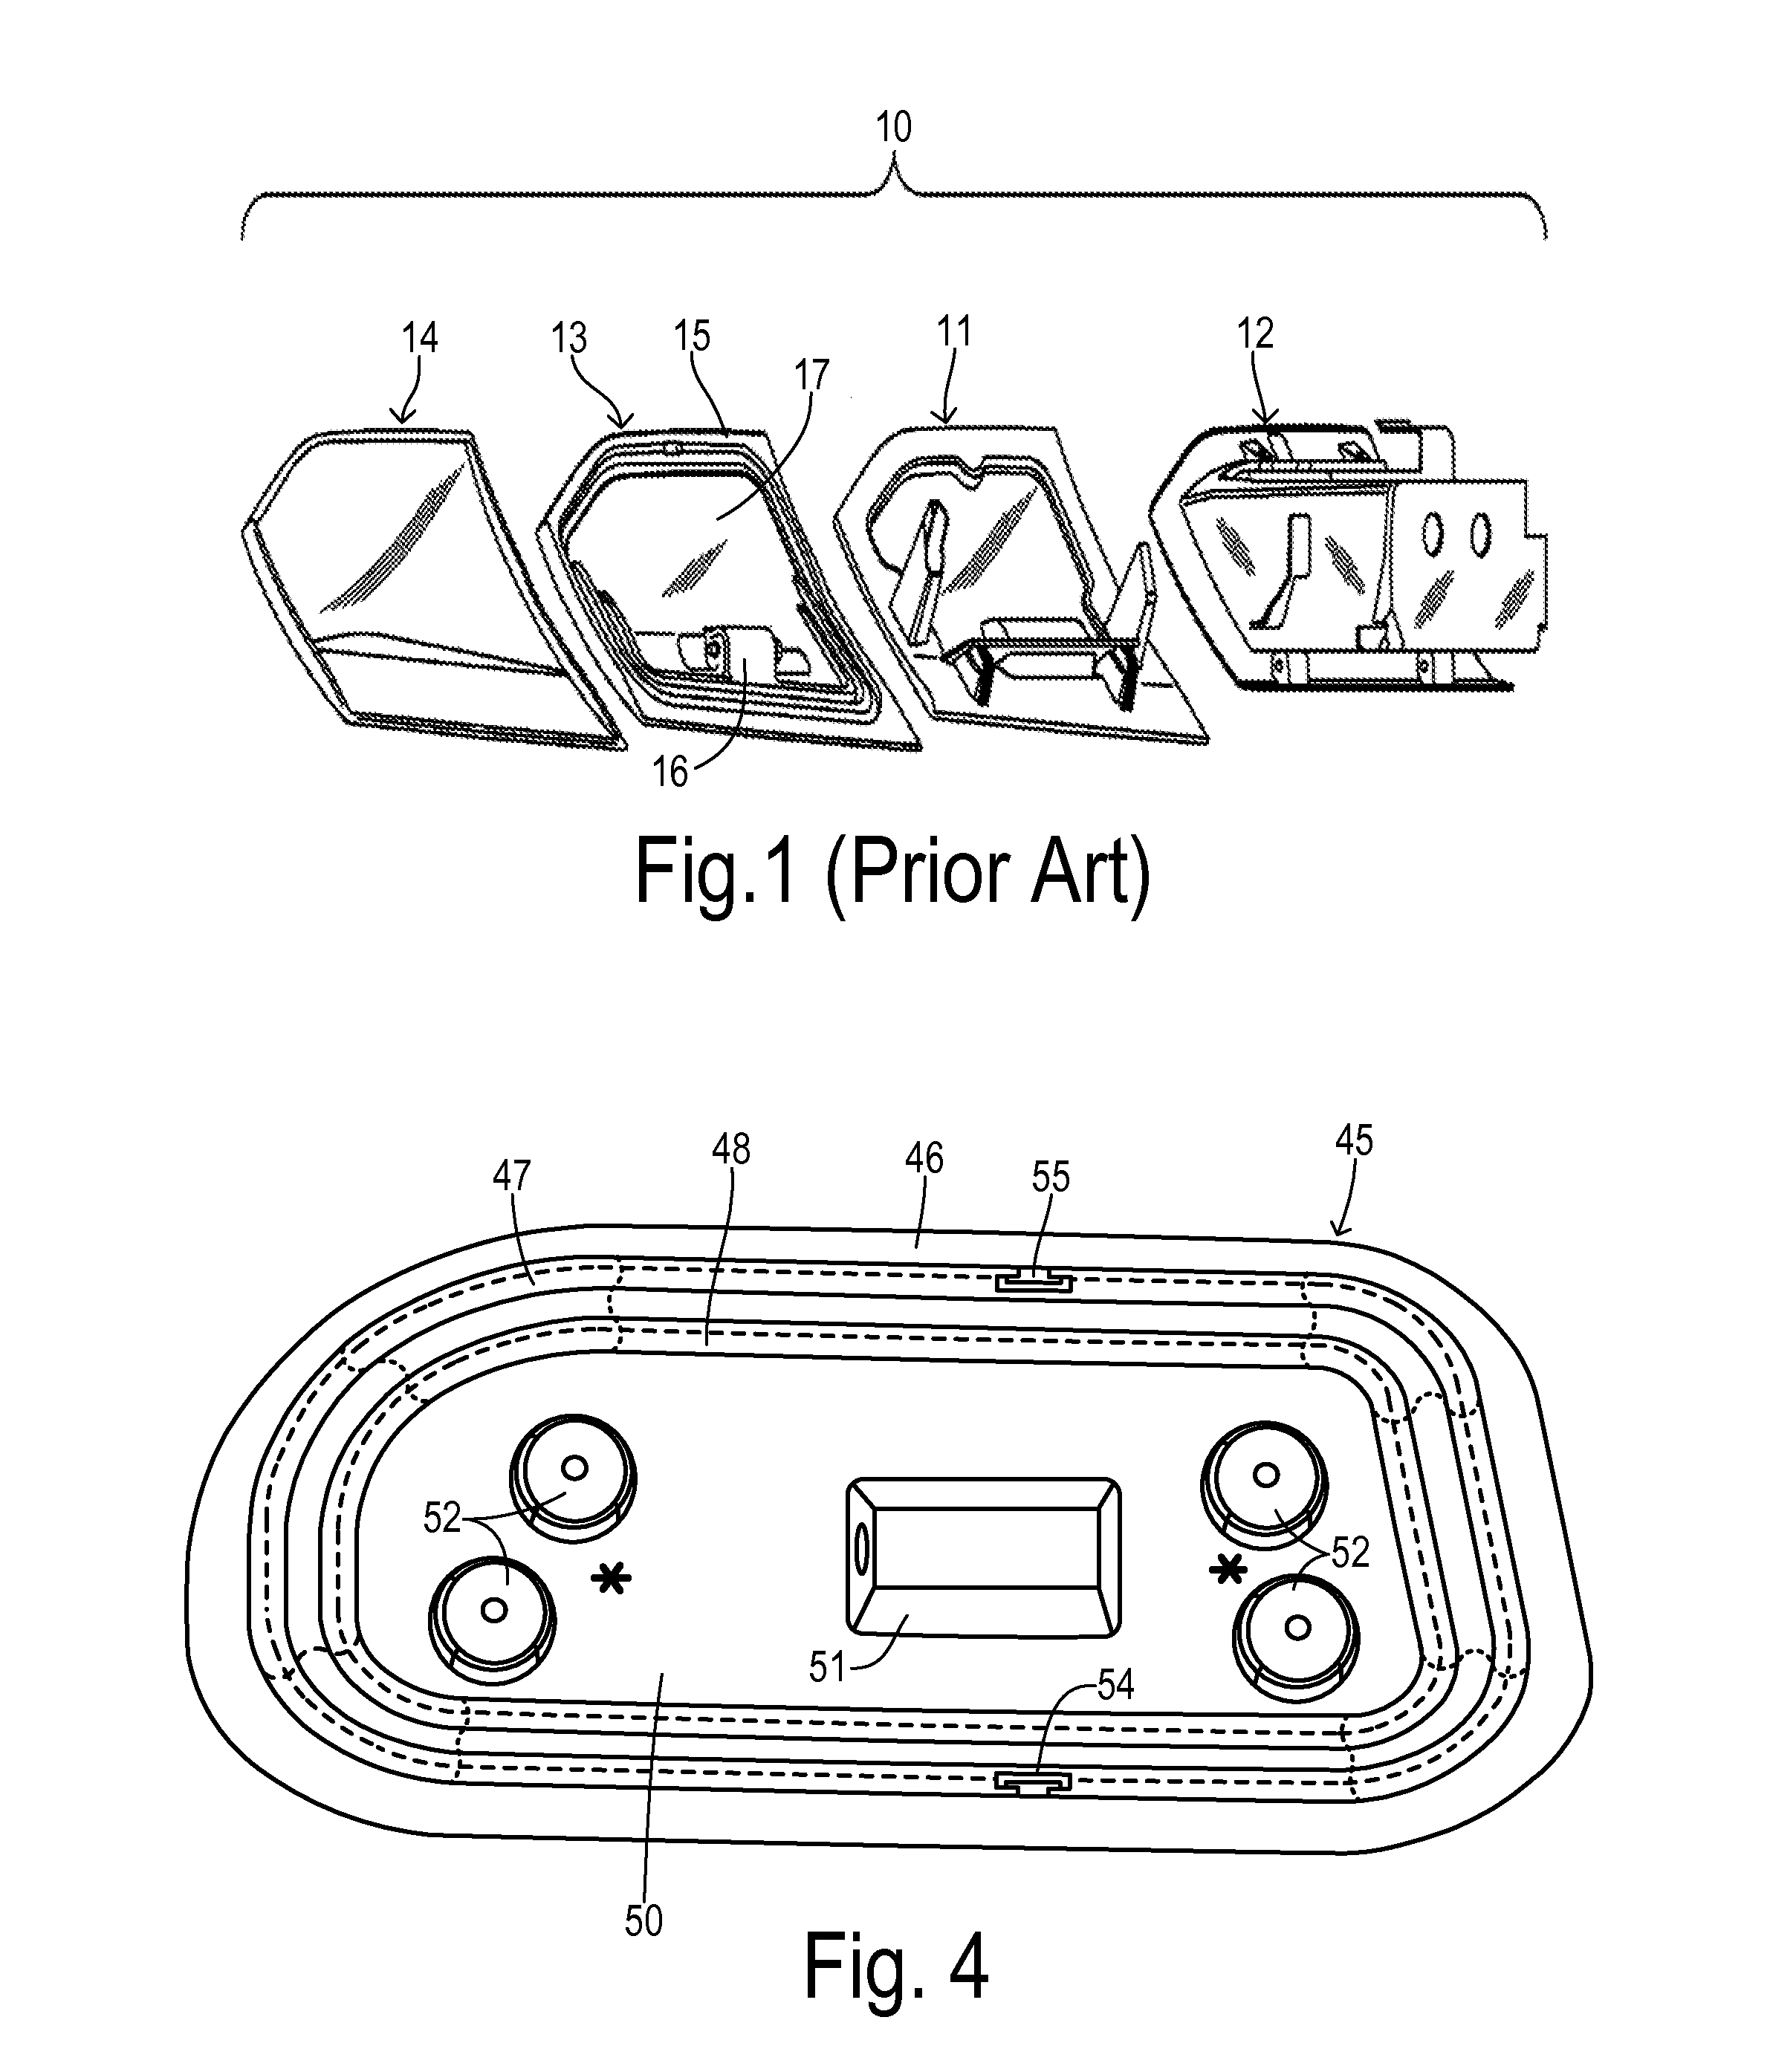 Active bolster with active vent for load management